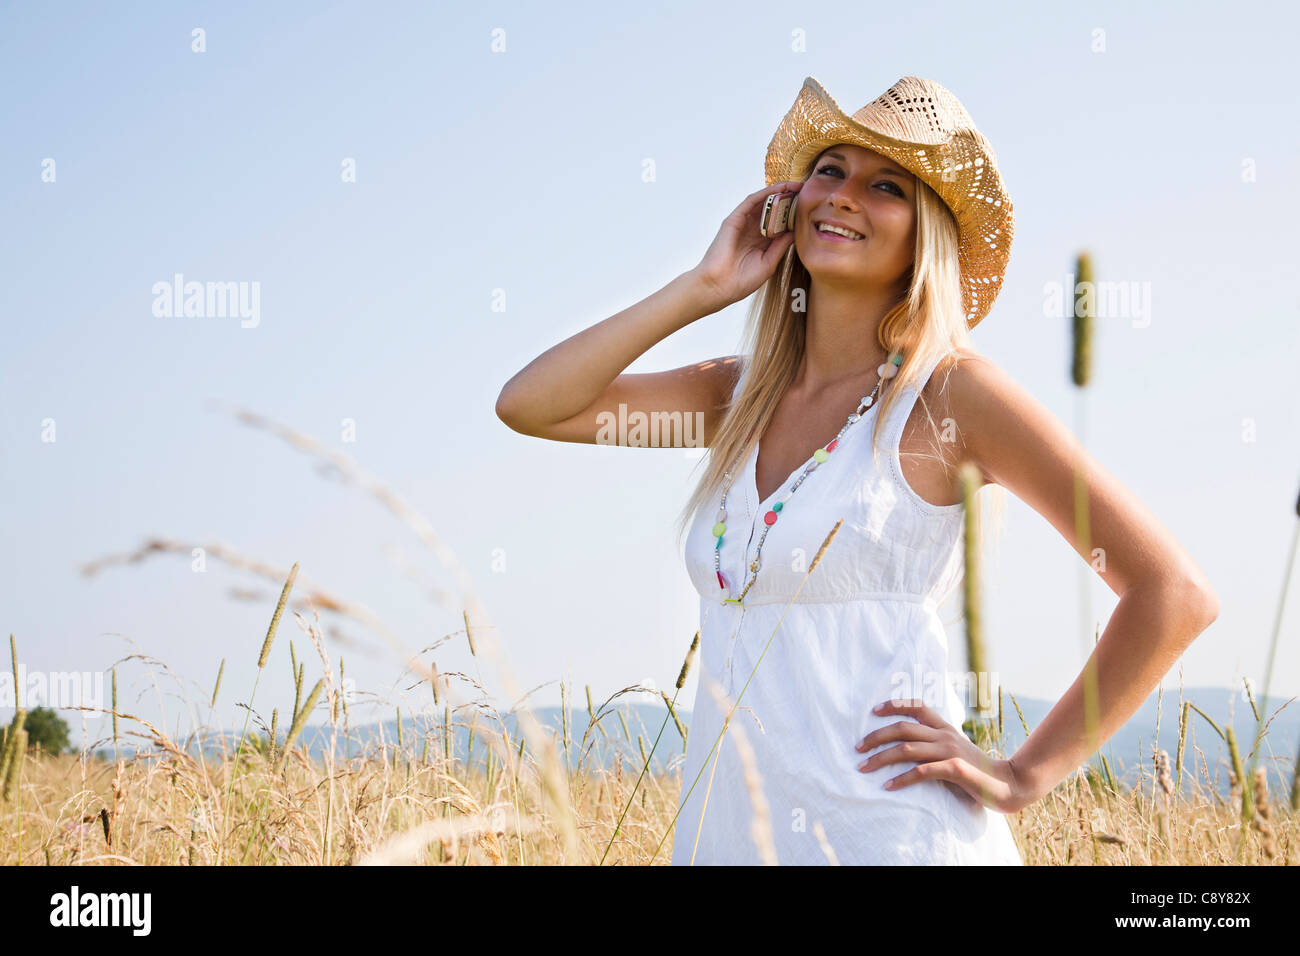 Portrait of young woman standing in field talking on mobile phone Banque D'Images